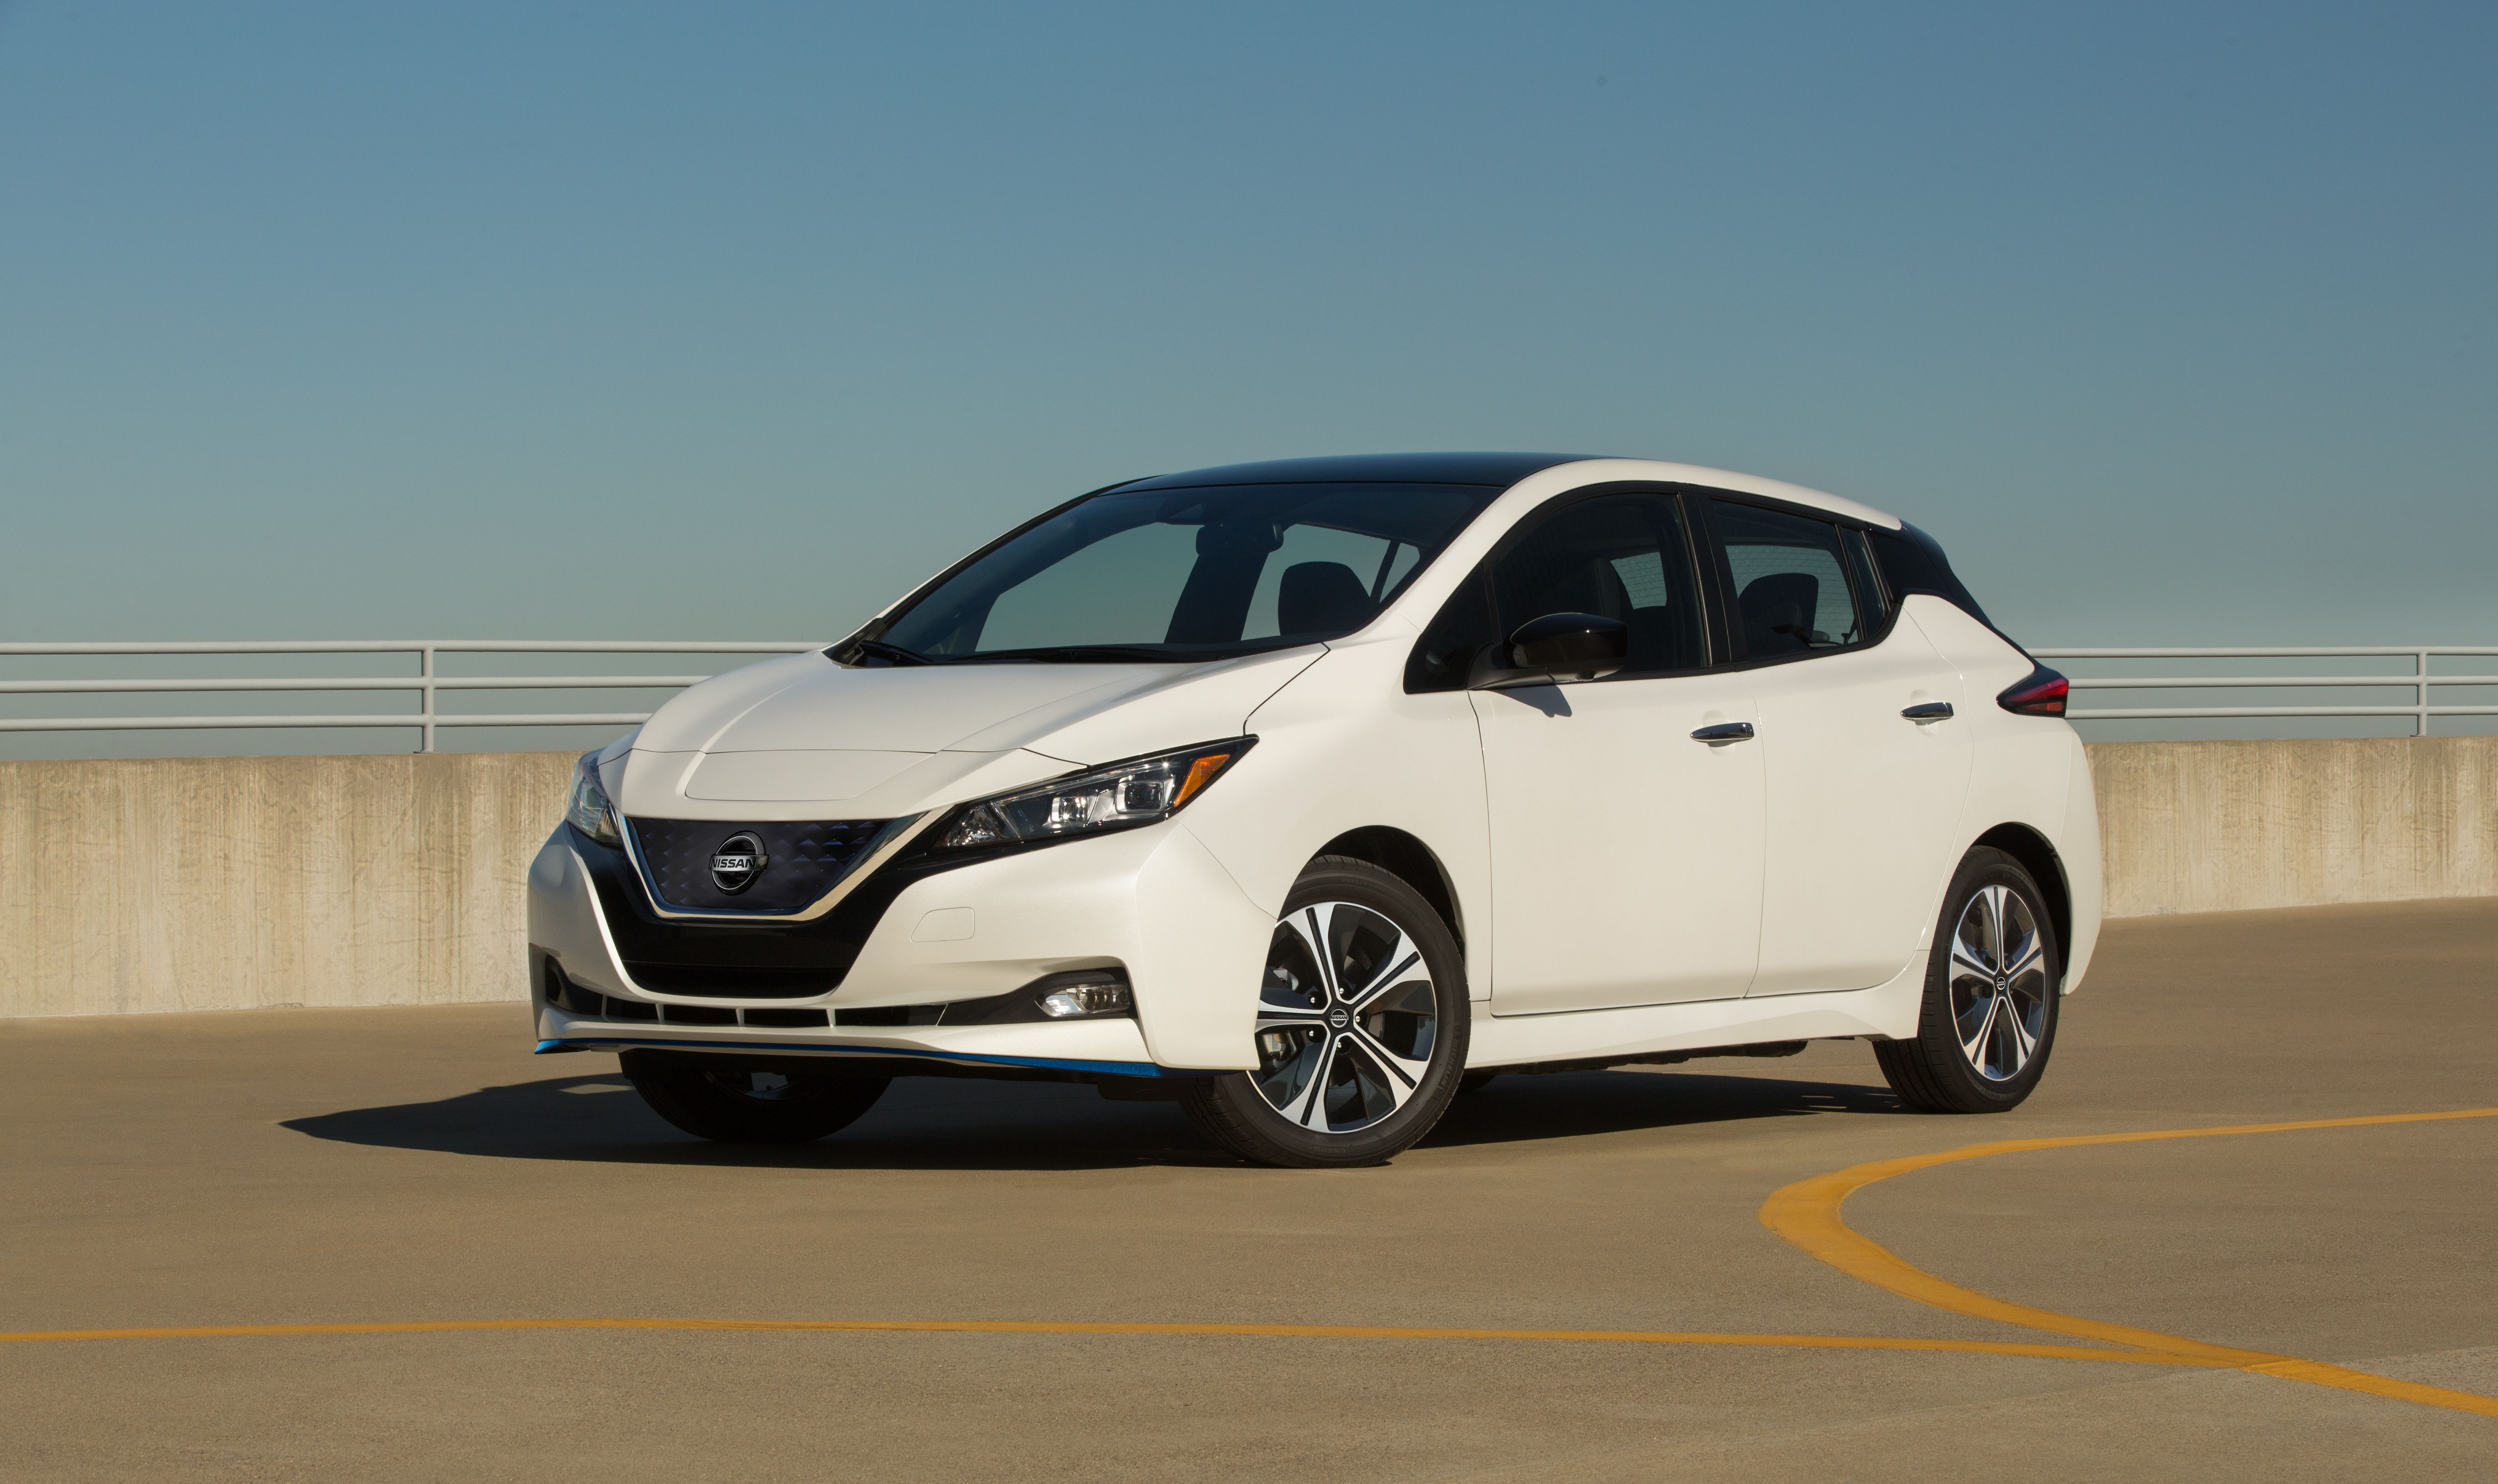 Flagermus Lionel Green Street klinke 2020 Nissan Leaf Review, Pricing, and Specs